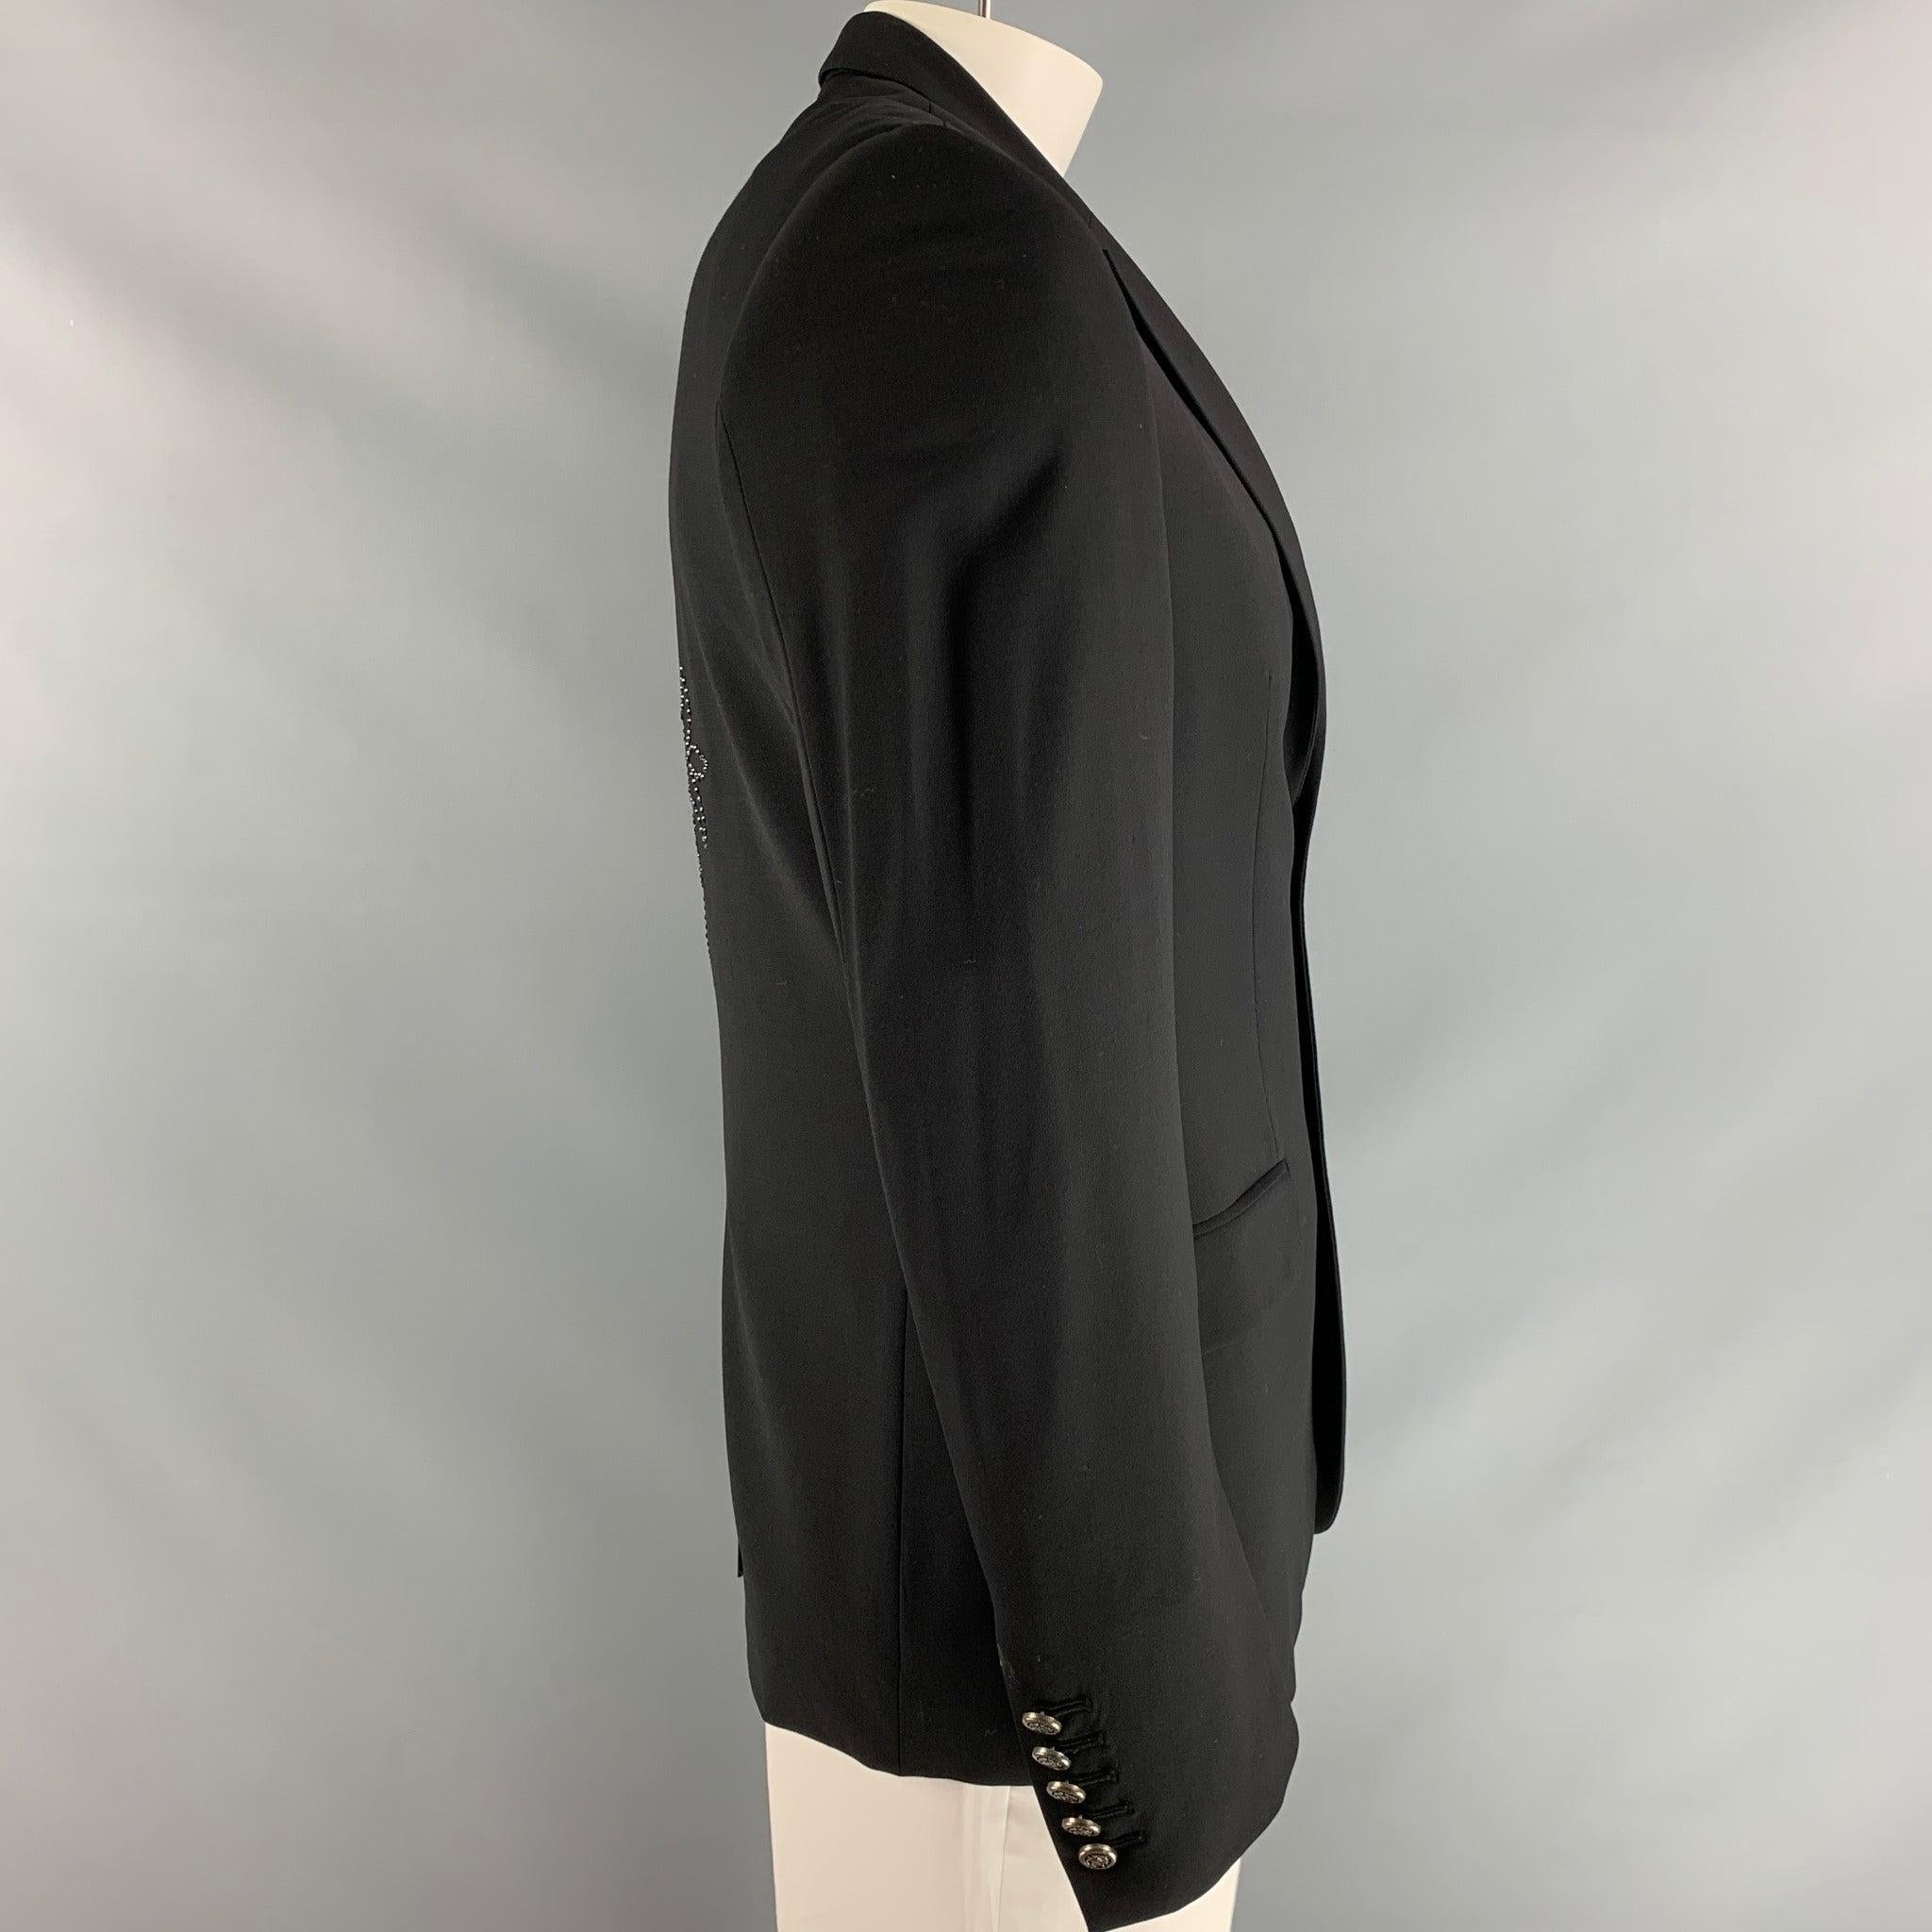 FAITH CONNEXION sport coat, fully lined comes in black fabric featuring two button closure, flap pockets, notch lapel and rhinestone applique at center back. Excellent Pre-Owned Condition. Fabric Tag Removed. 

Marked:   L 

Measurements: 
